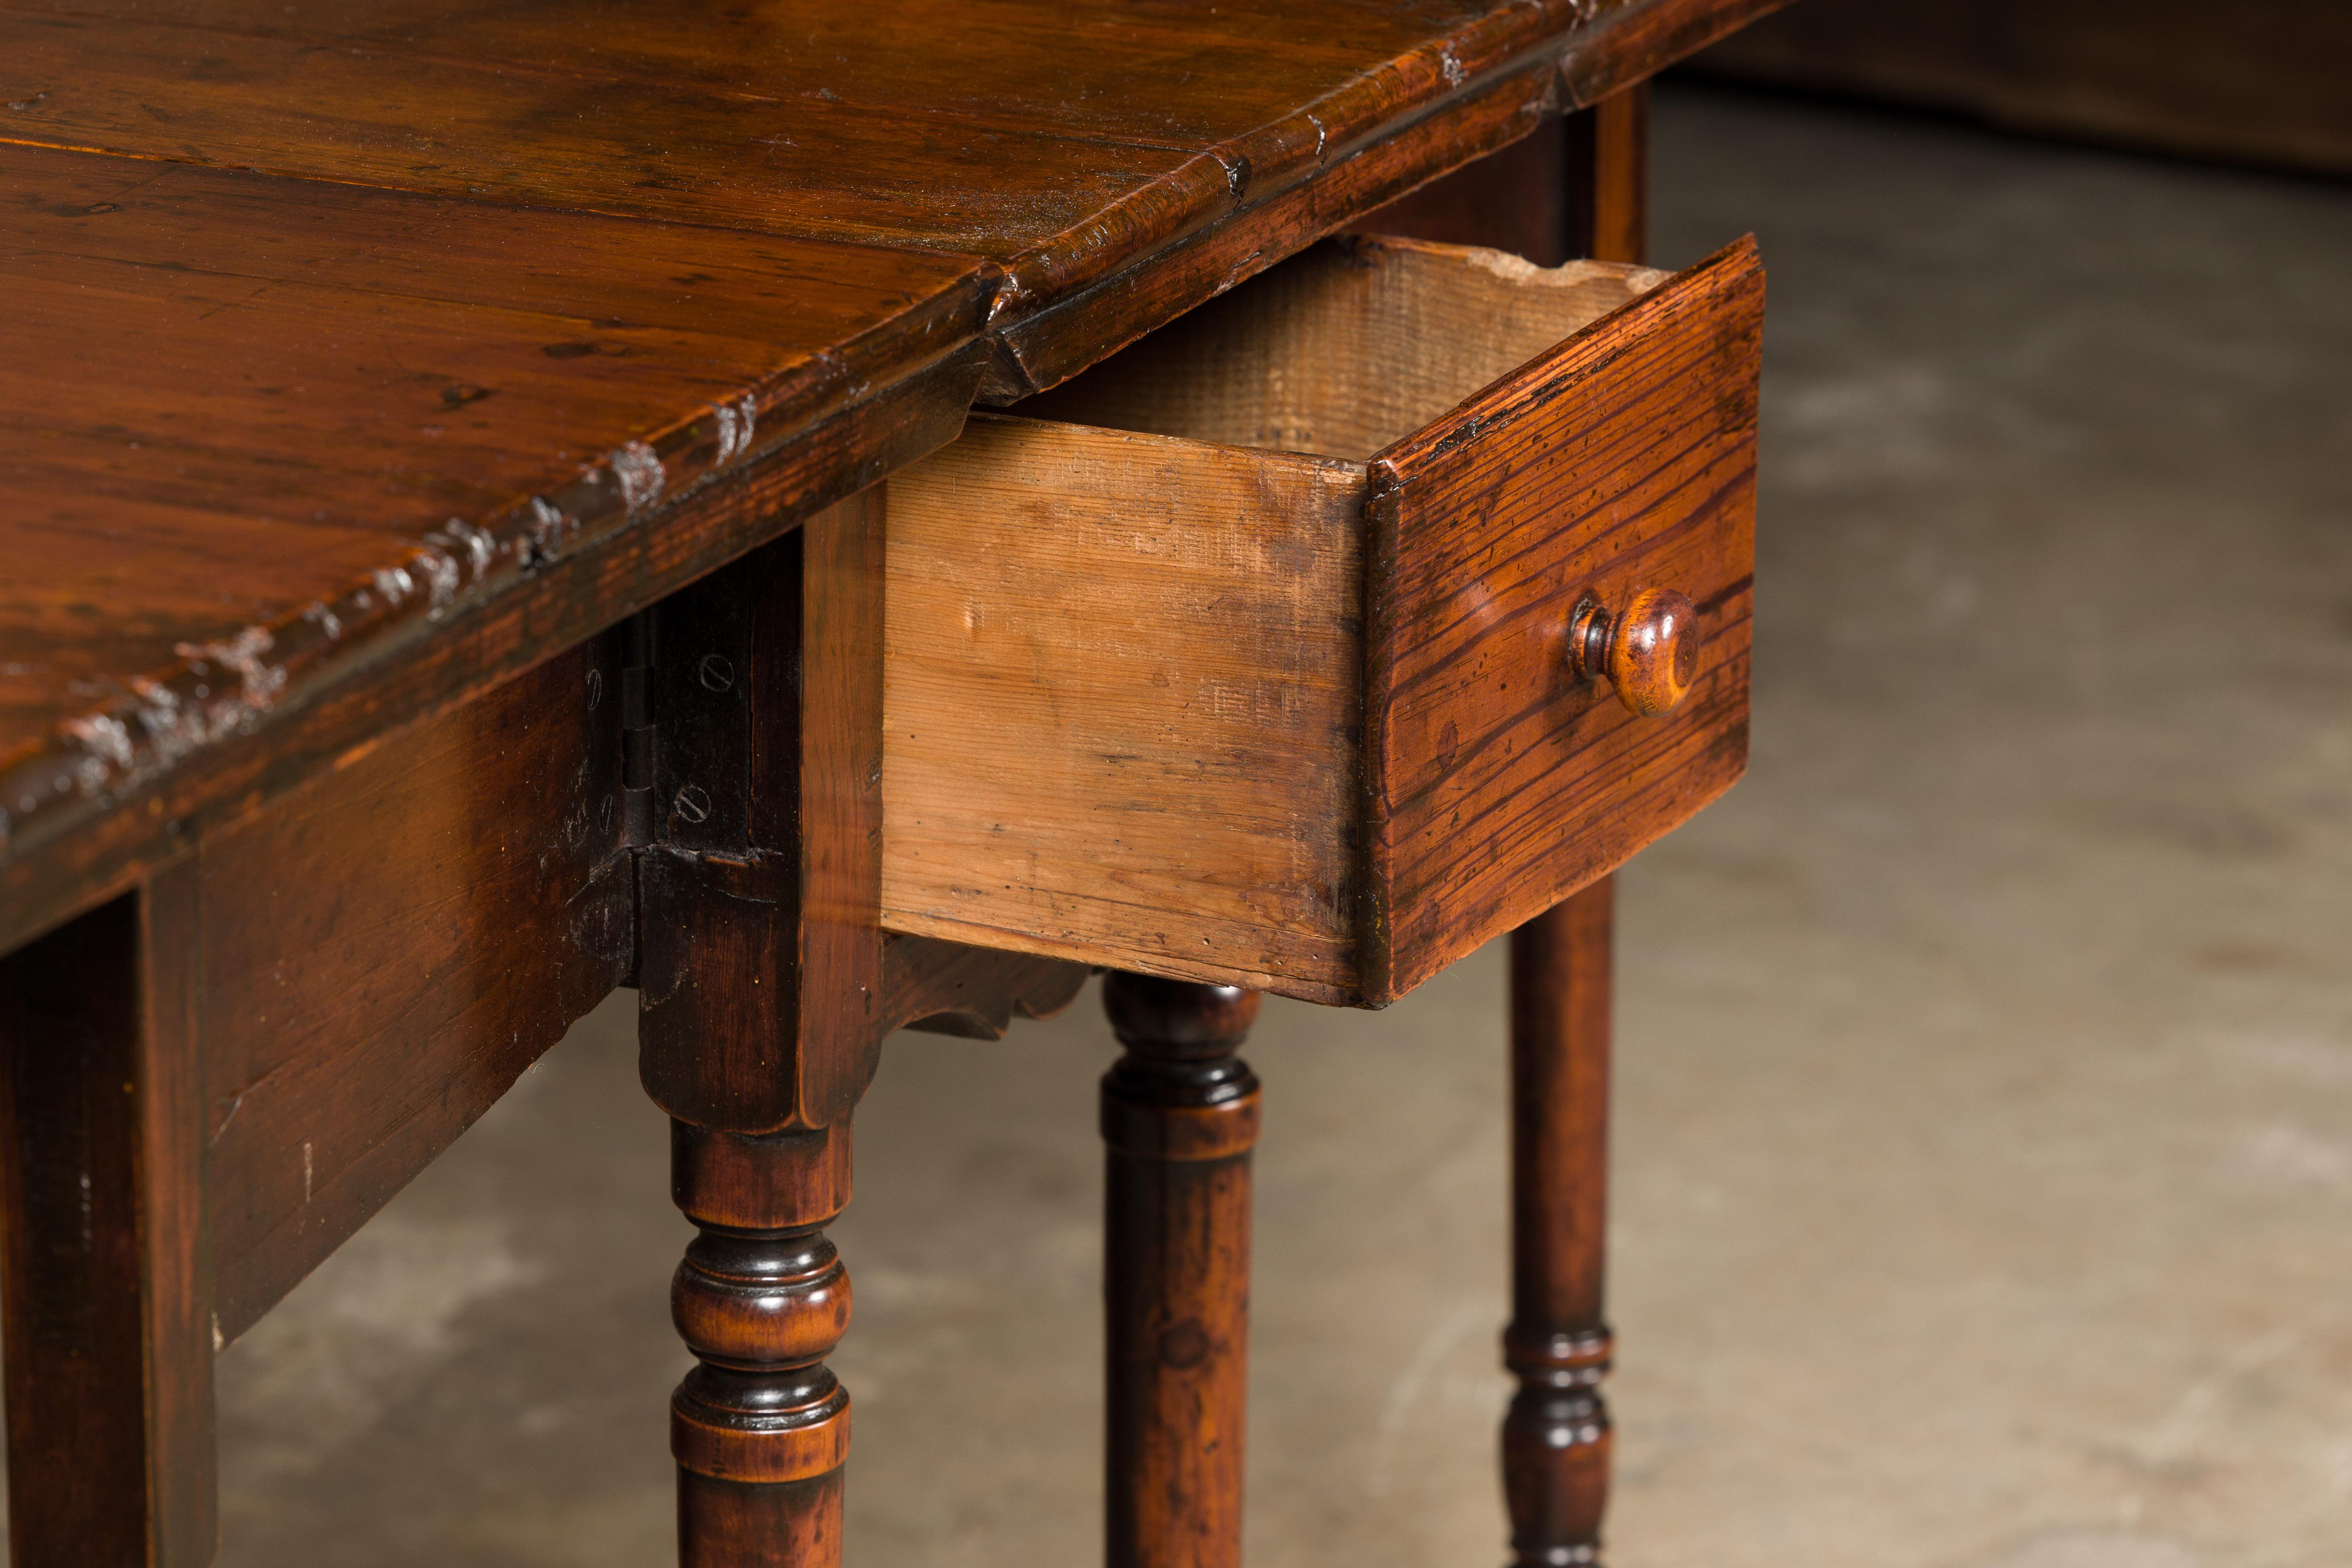 English 19th Century Oak Drop Leaf Table with Turned Legs and Two Drawers For Sale 2